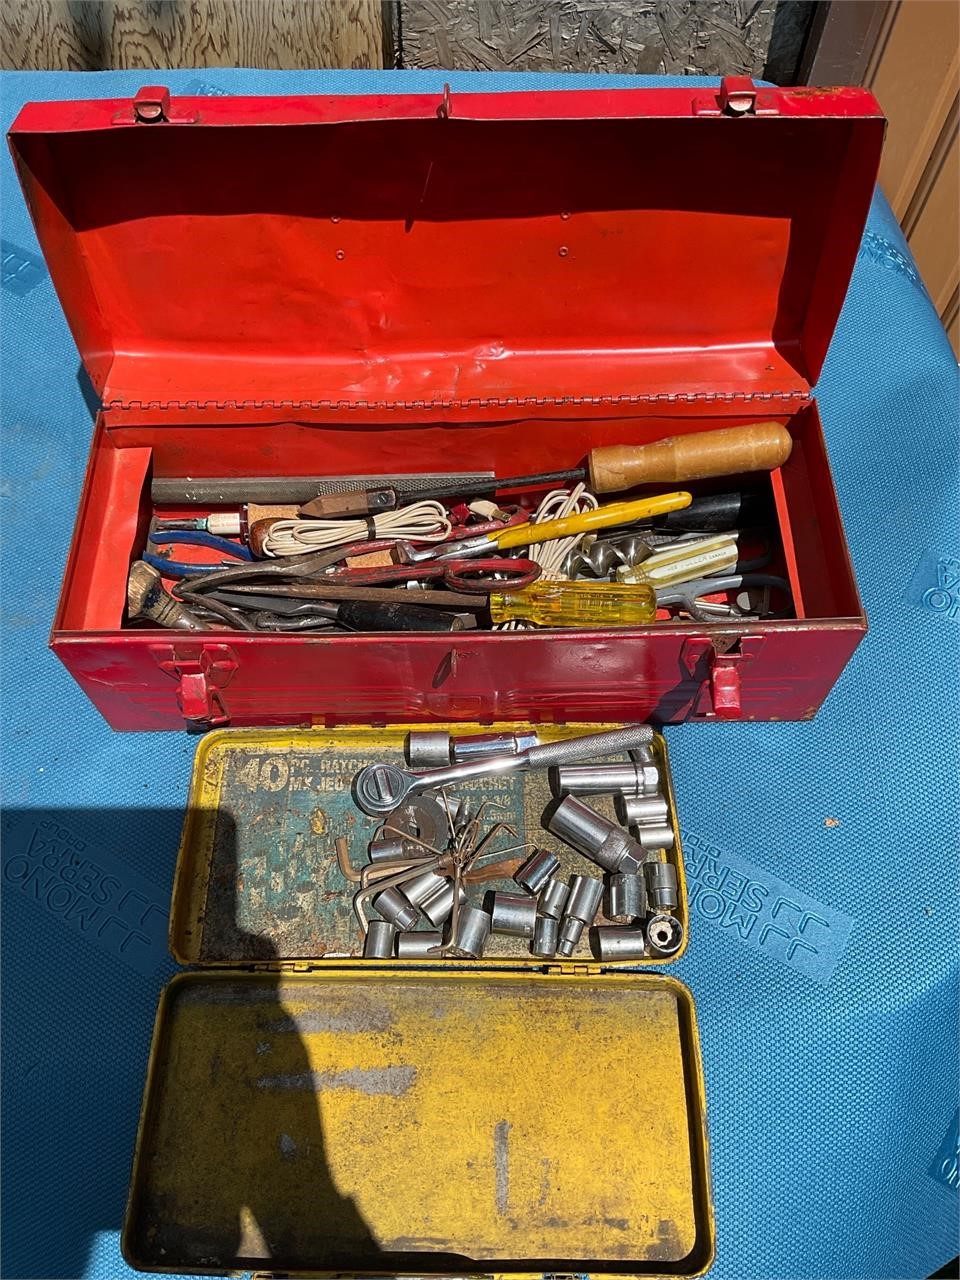 Malden crescent estate auction (tools collect and more).